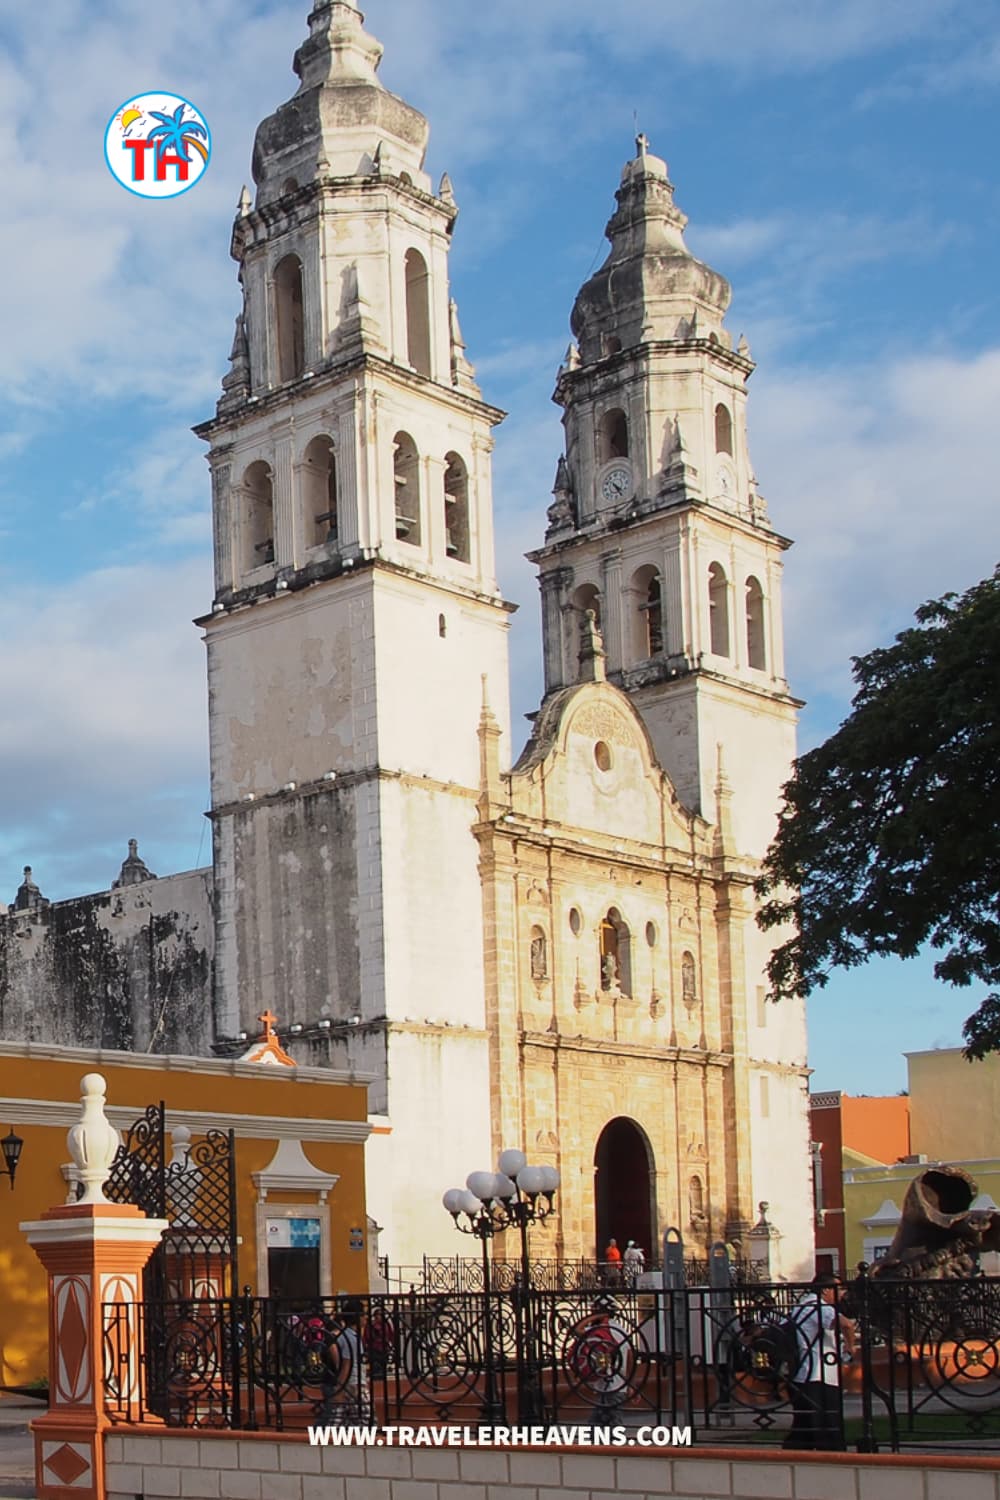 Beautiful Destinations, Best Places to Visit in Campeche, Mexico, Mexico Best Places, Mexico Travel Guide, Travel to Campeche, Visit Campeche